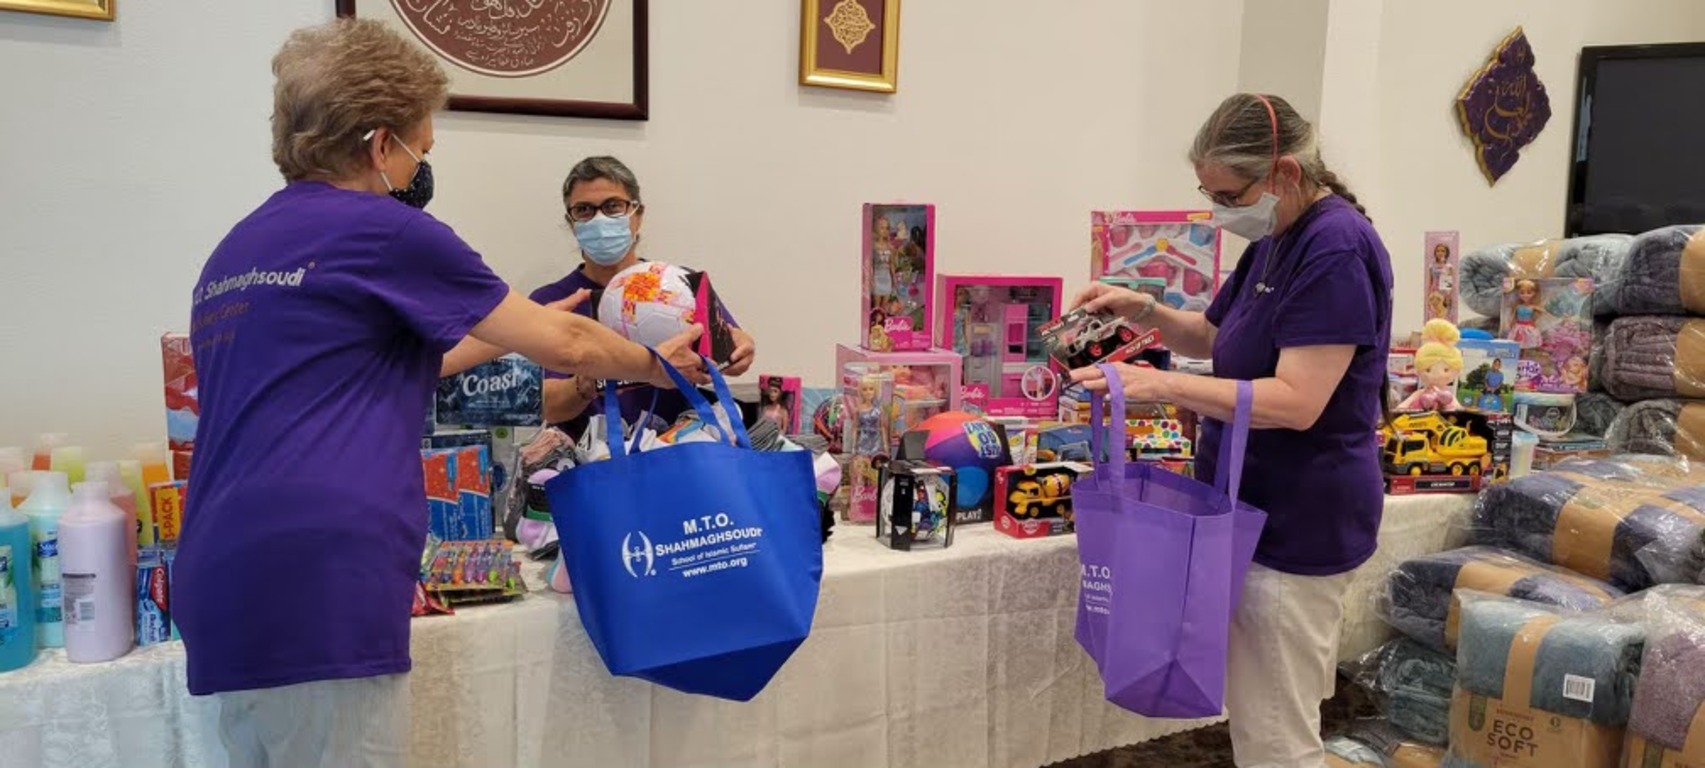 M.T.O. Berkeley Recognizes World Refugee Day by Donating Care Packages